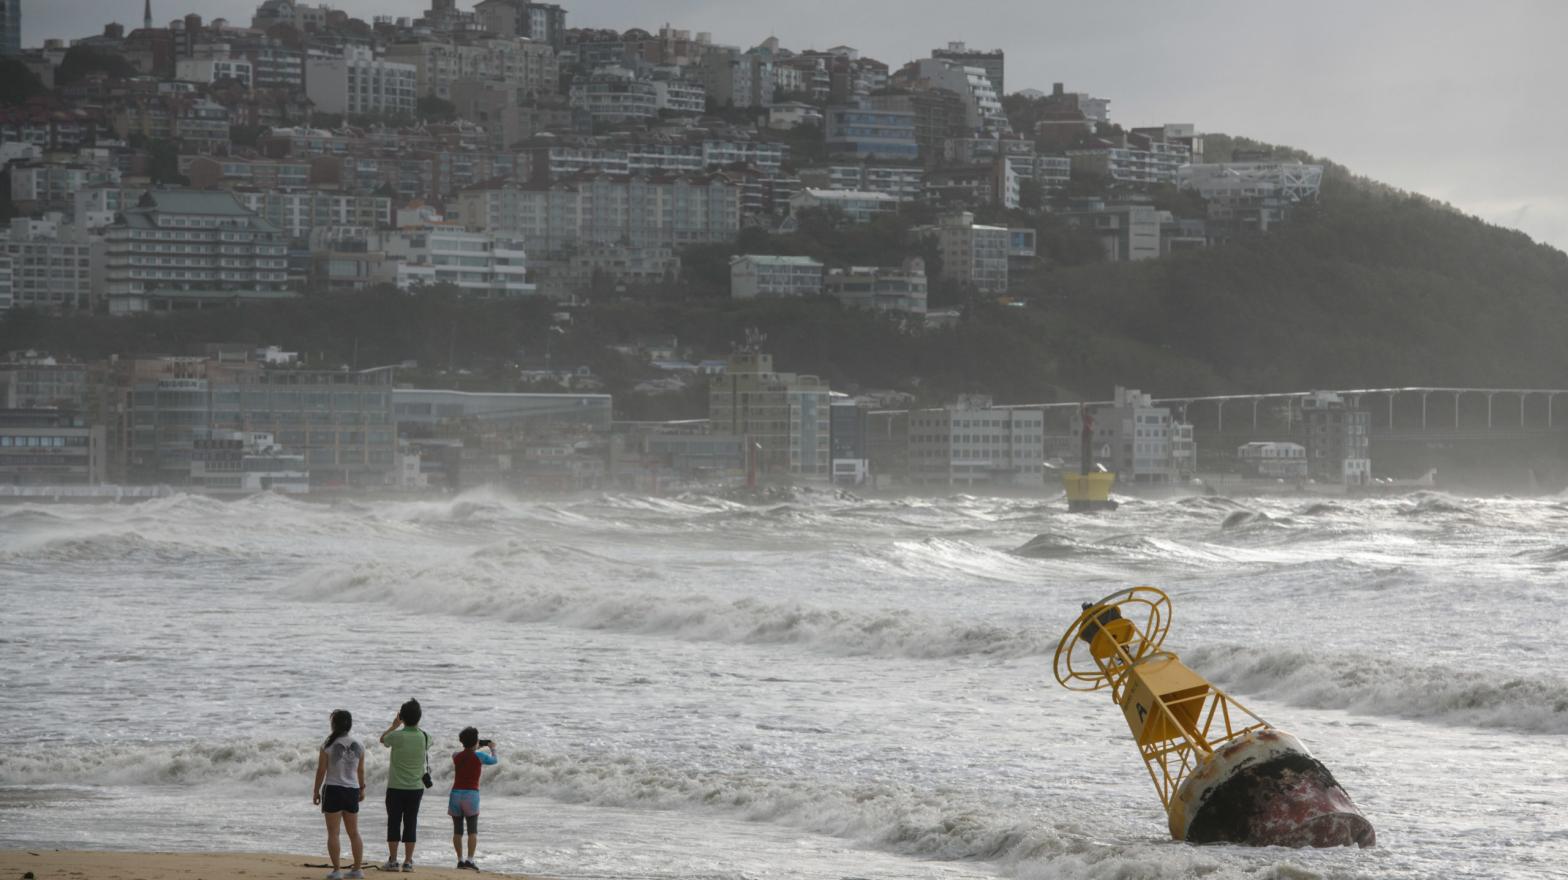 A buoy became that untethered during heavy swell brought by Typhoon Maysak overnight on a beach in Busan on September 3, 2020. (Photo: Ed Jones, Getty Images)